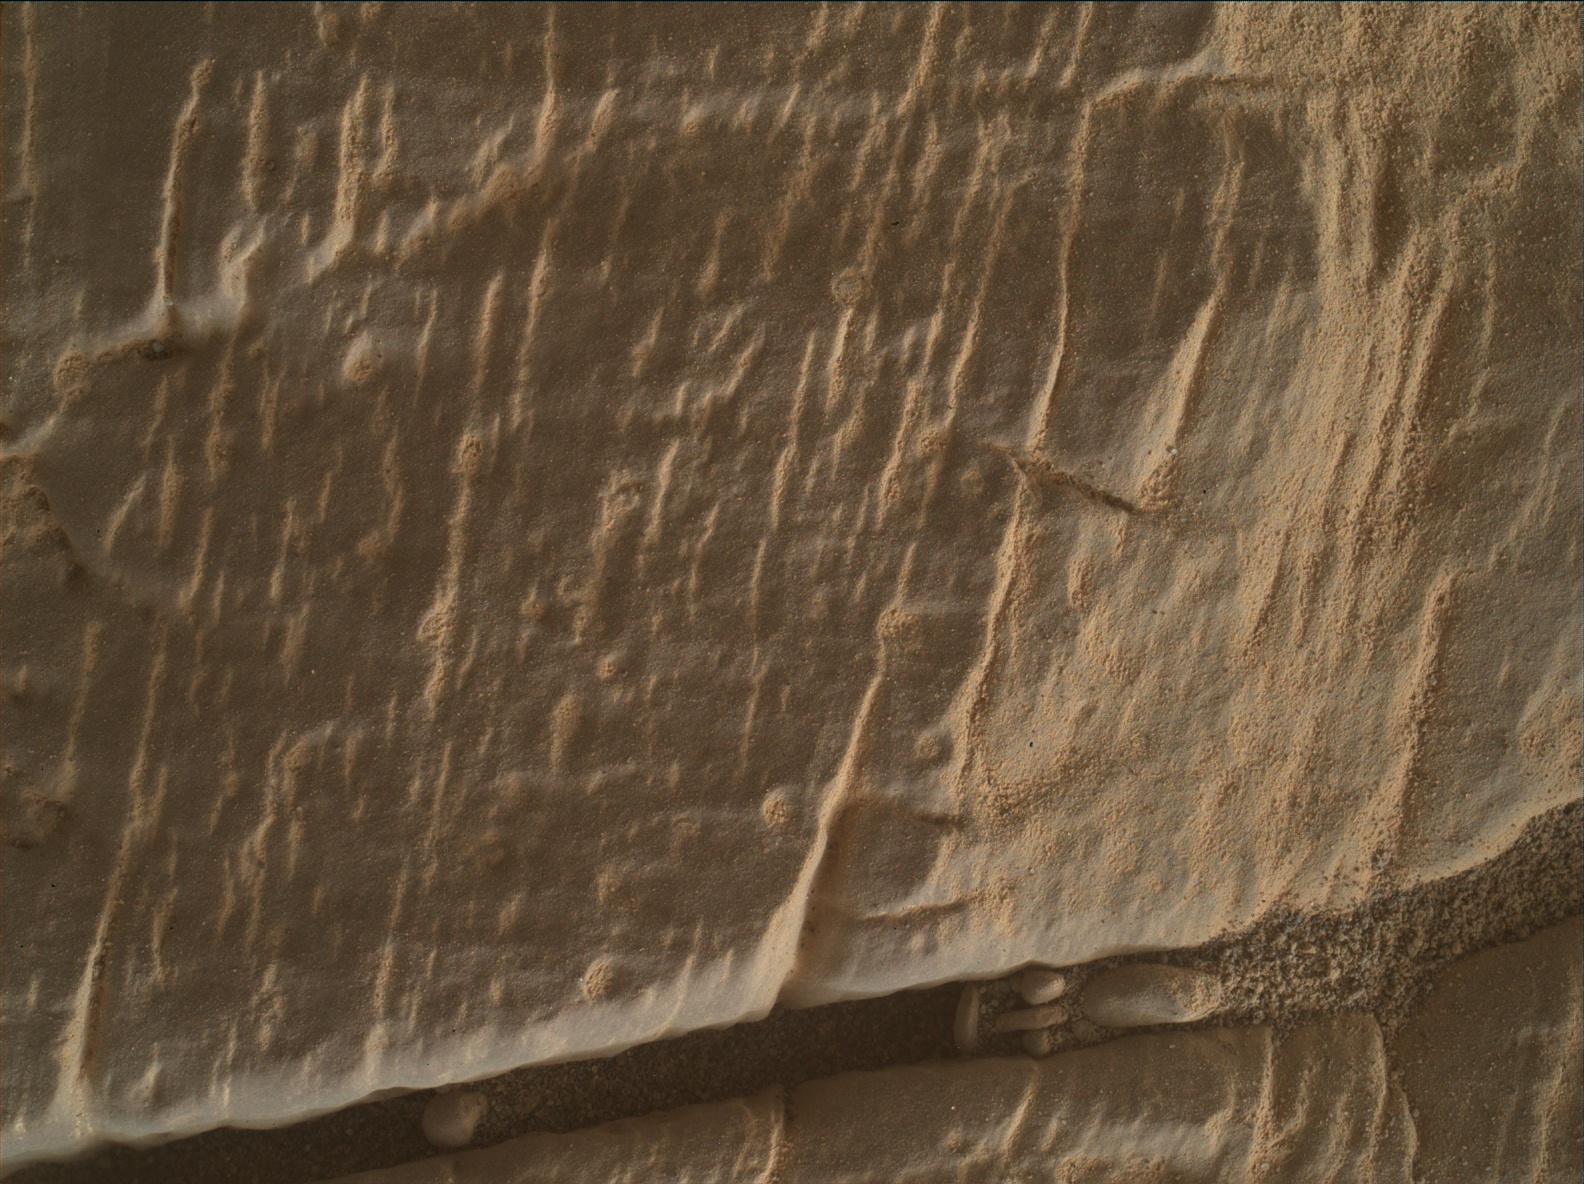 Nasa's Mars rover Curiosity acquired this image using its Mars Hand Lens Imager (MAHLI) on Sol 2471